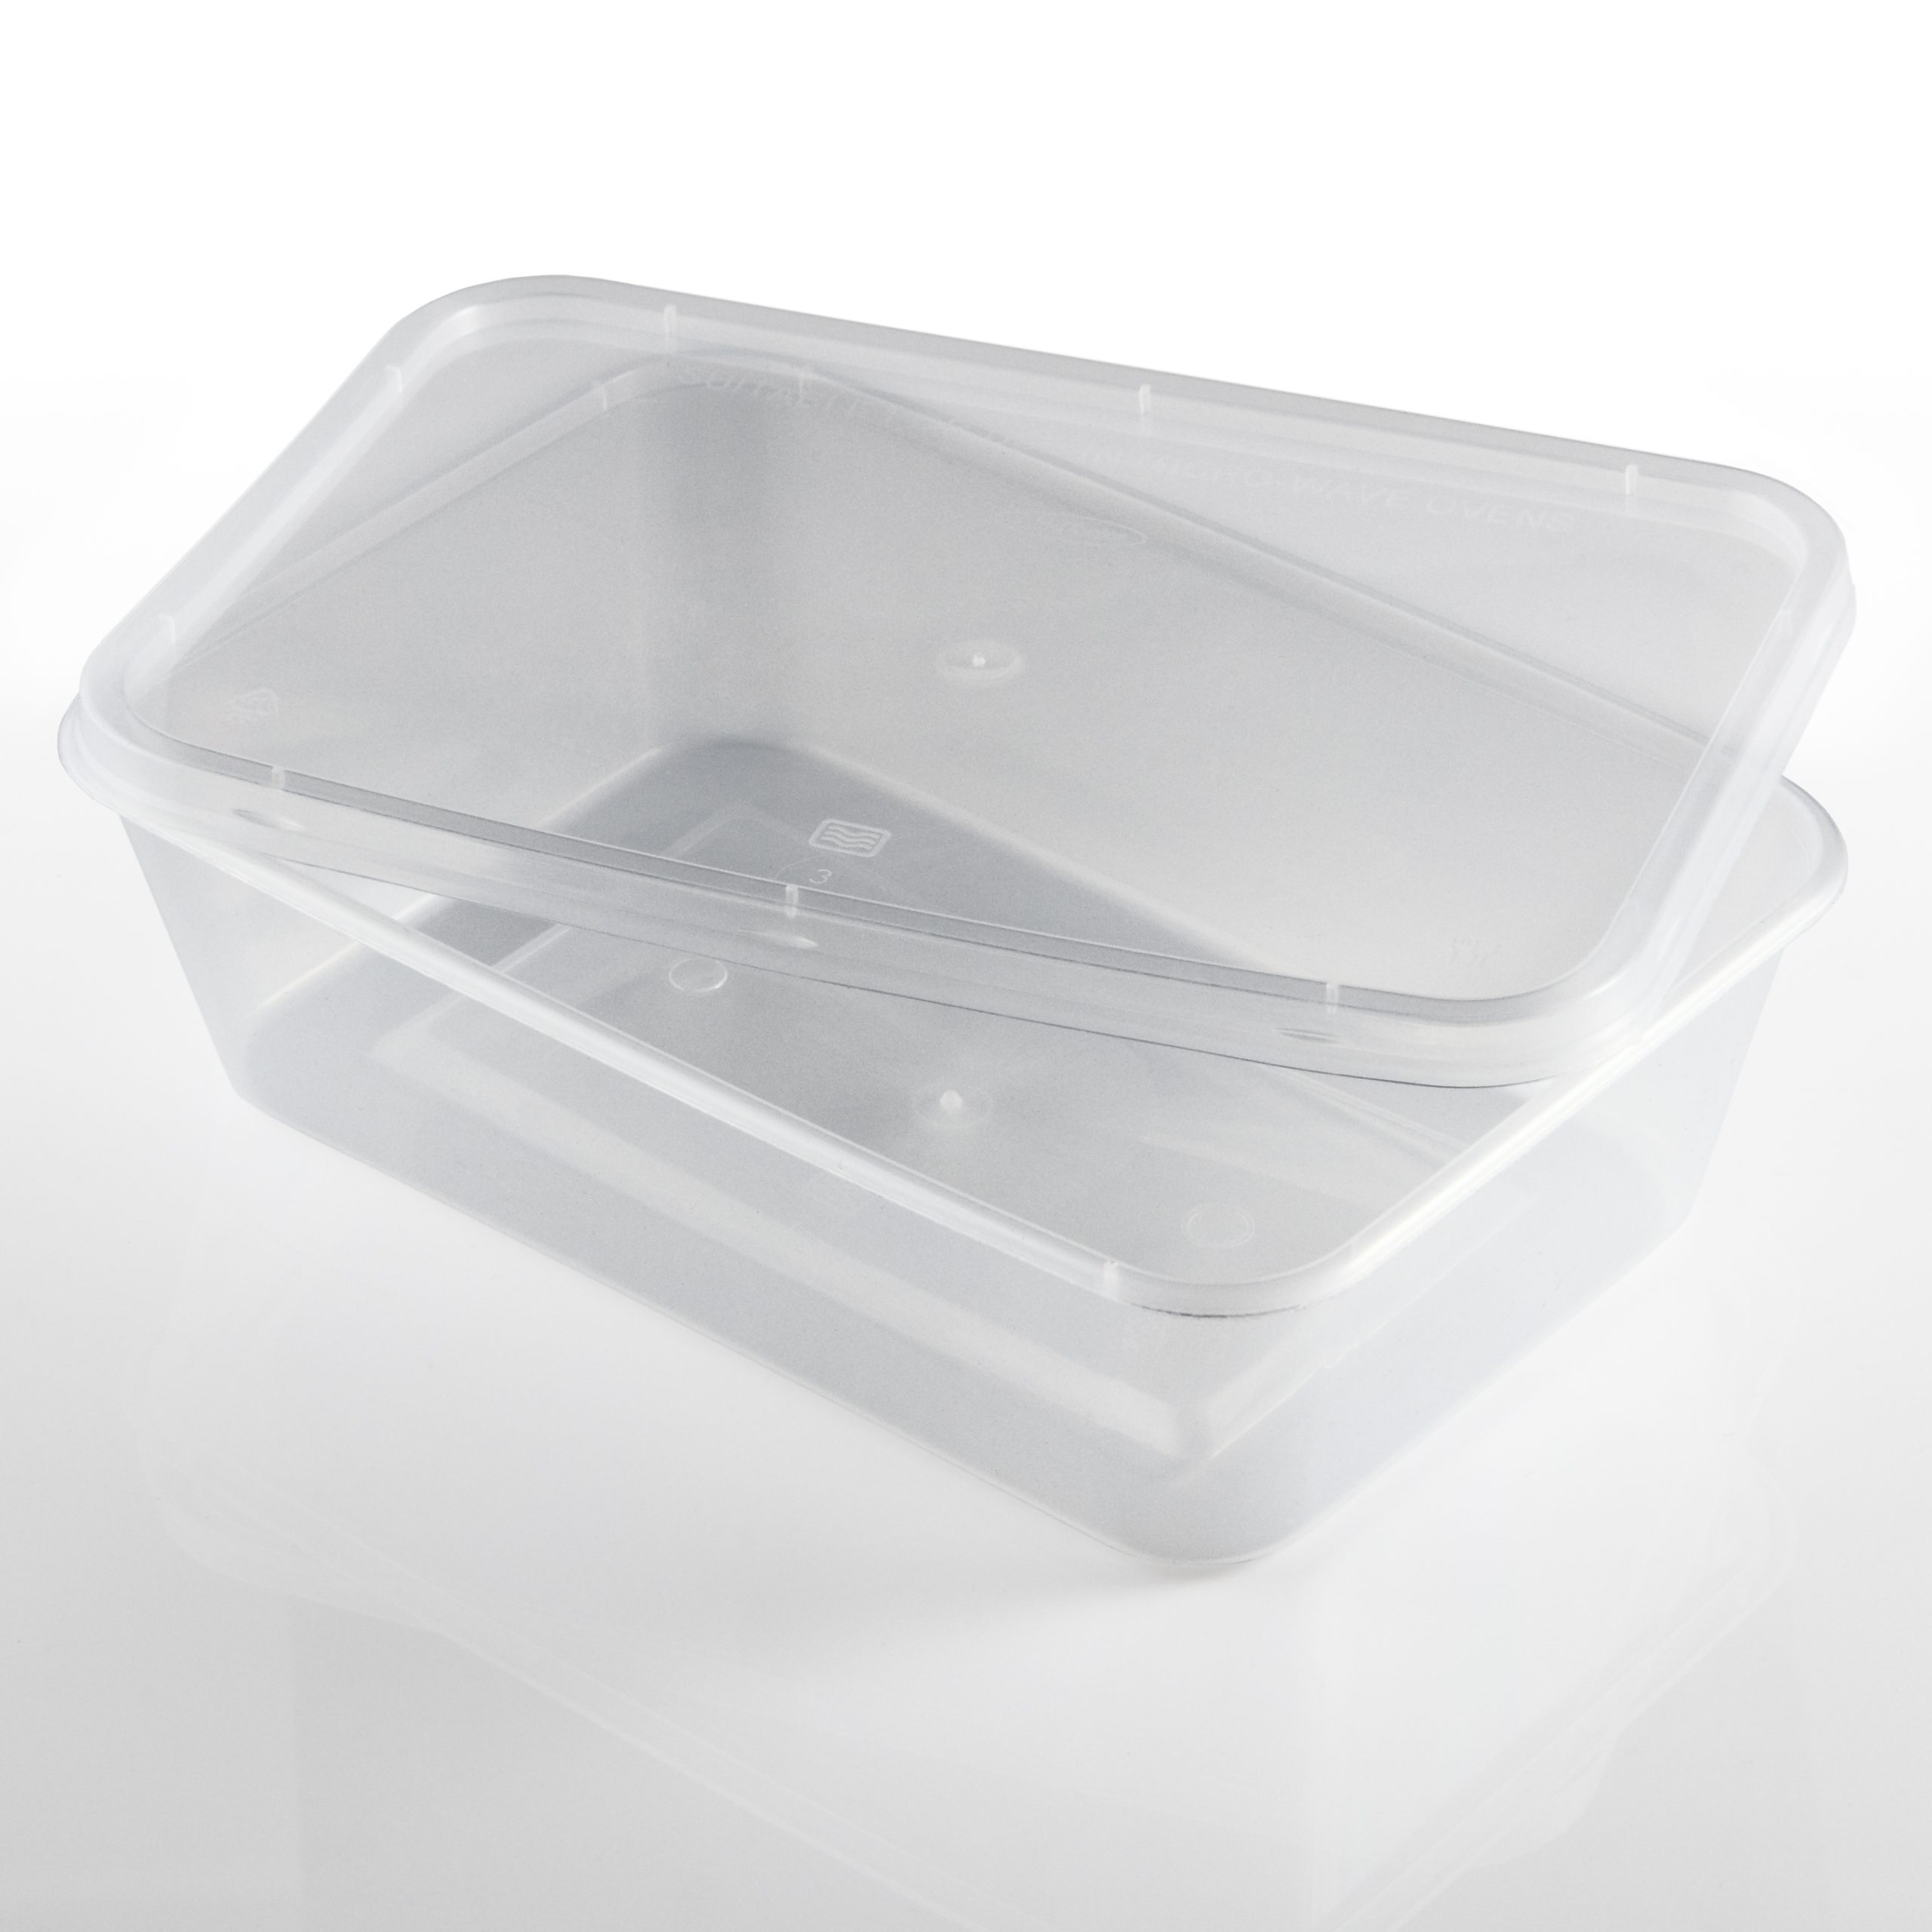 Microwaveable Containers